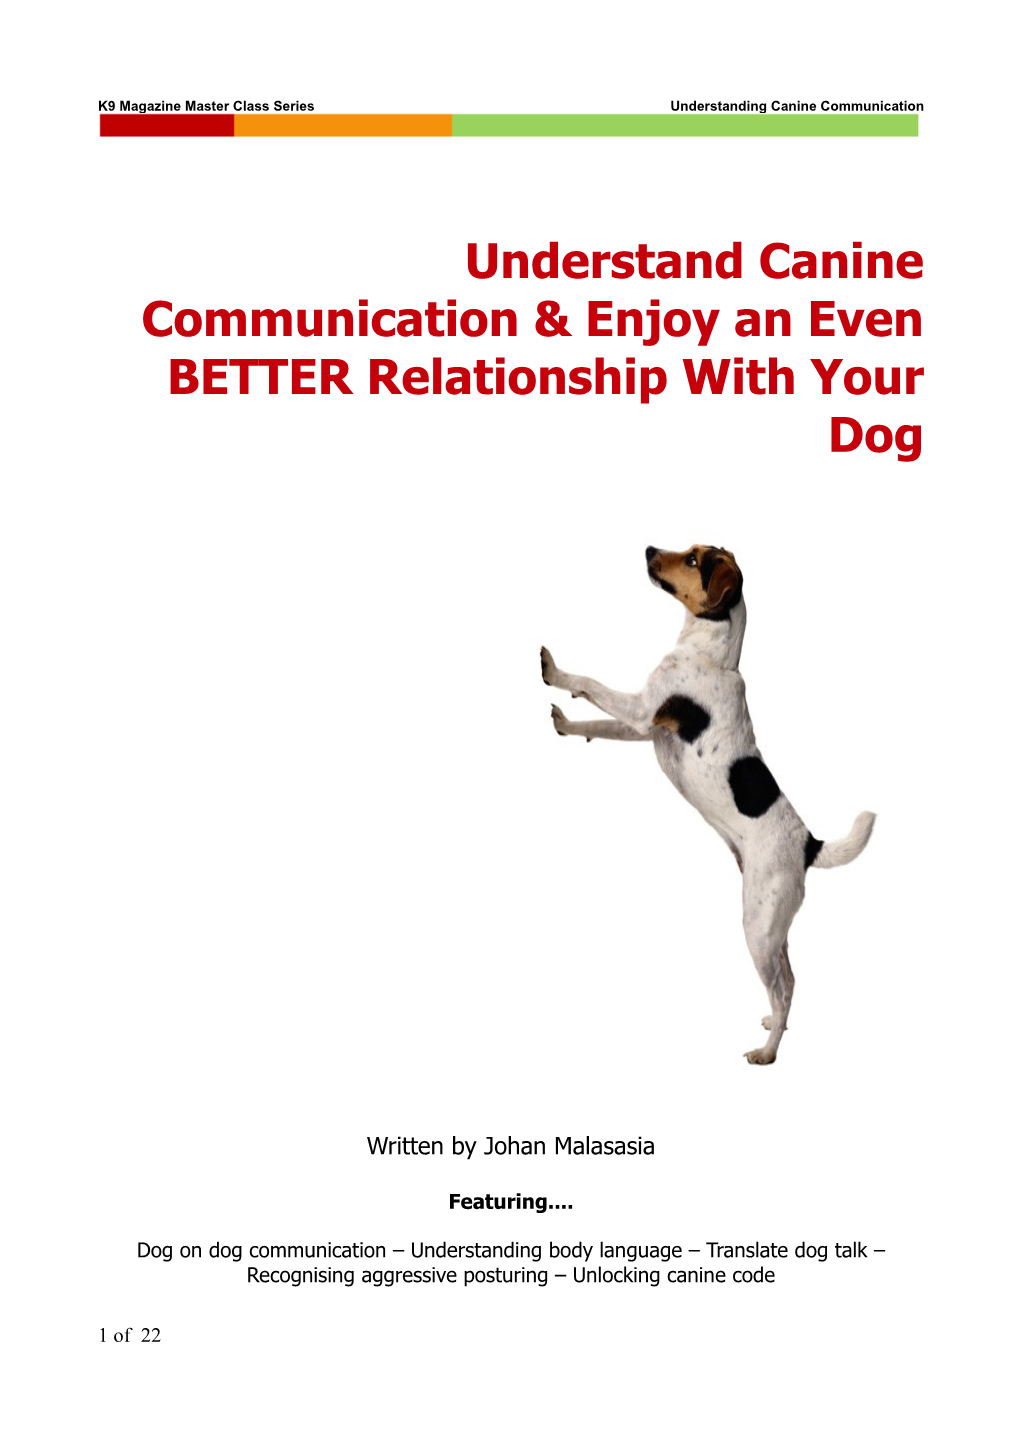 Understand Canine Communication & Enjoy an Even BETTER Relationship with Your